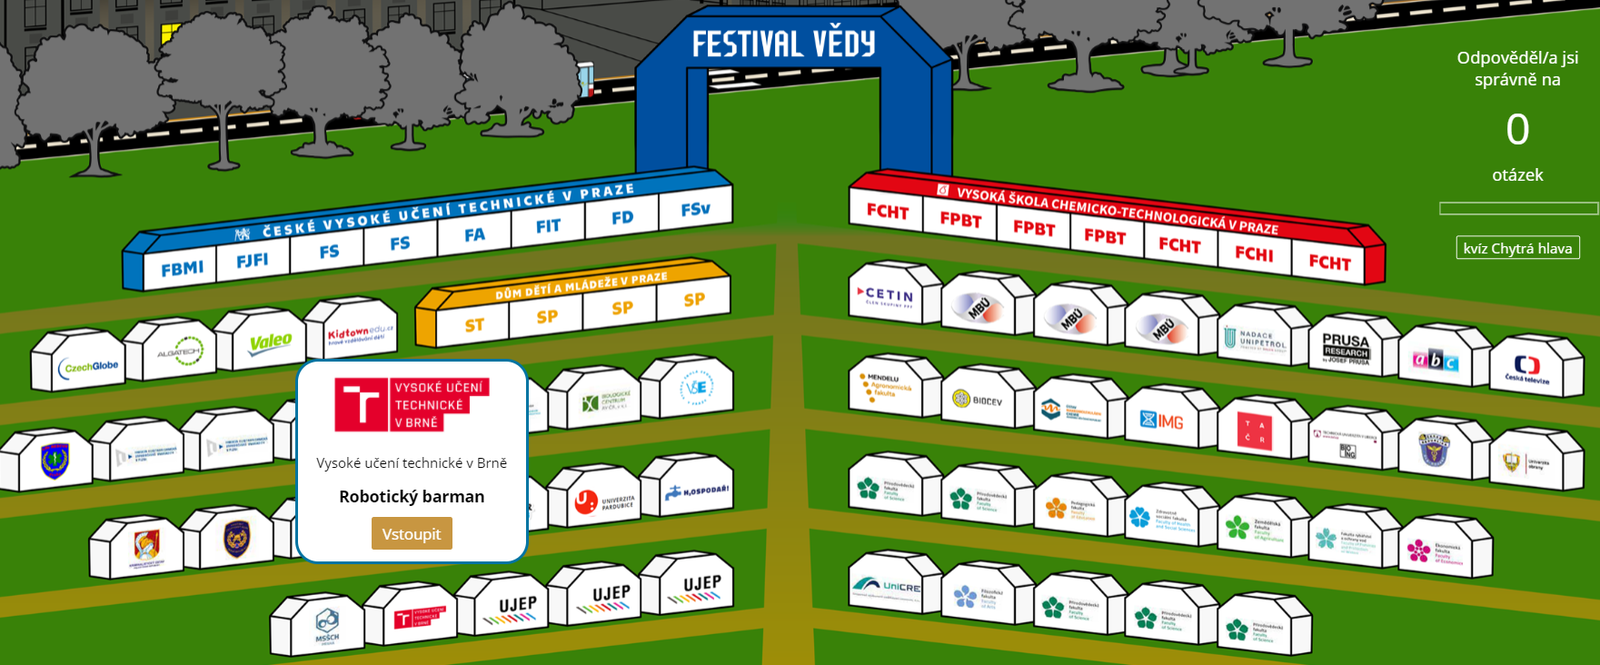 festival-vedy.png